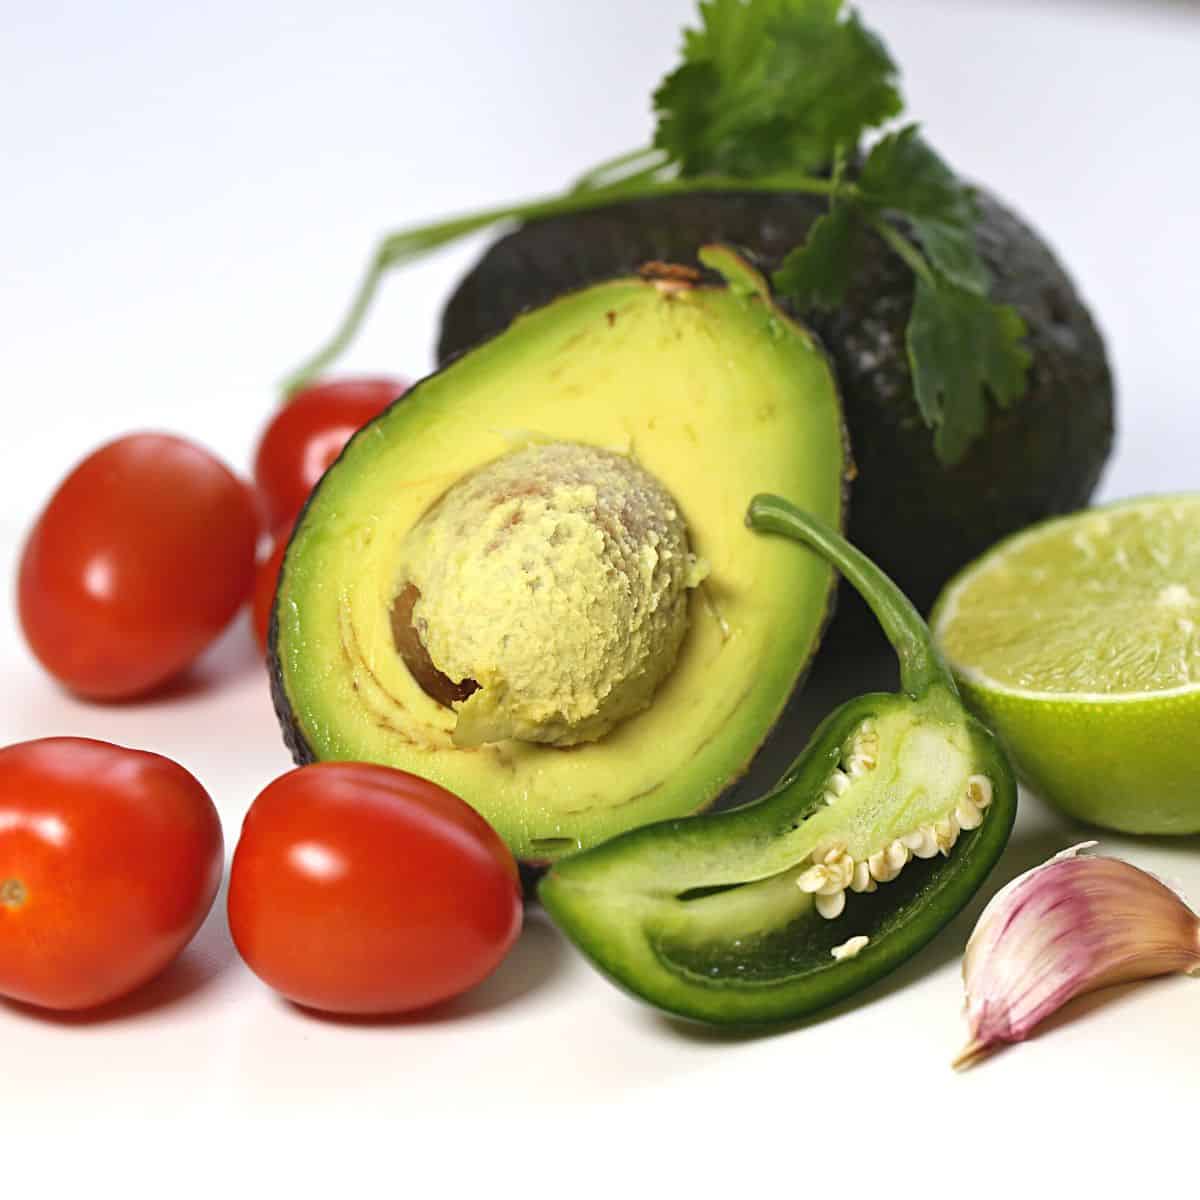 ingredients for guac - Guacamole is keto & Here's Why with Recipes